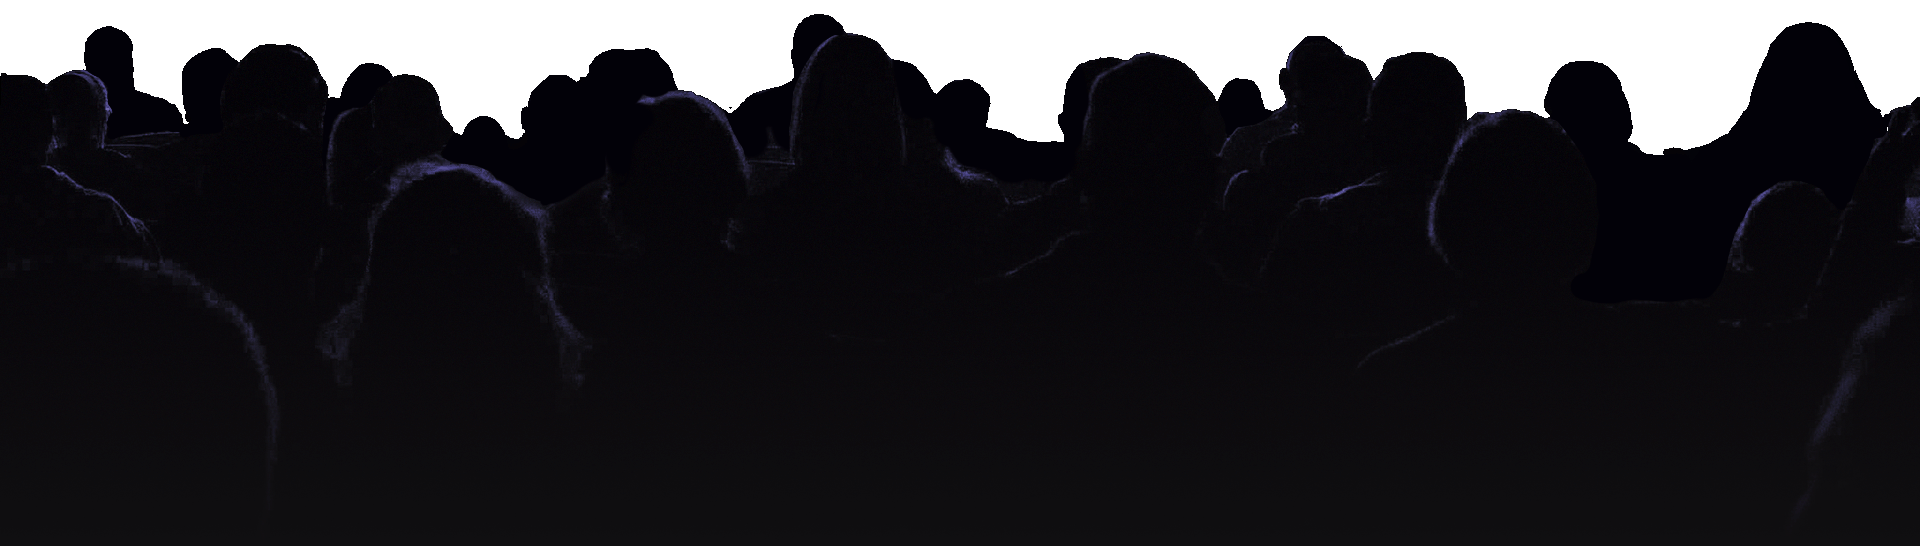 silhouette of audience raising hands